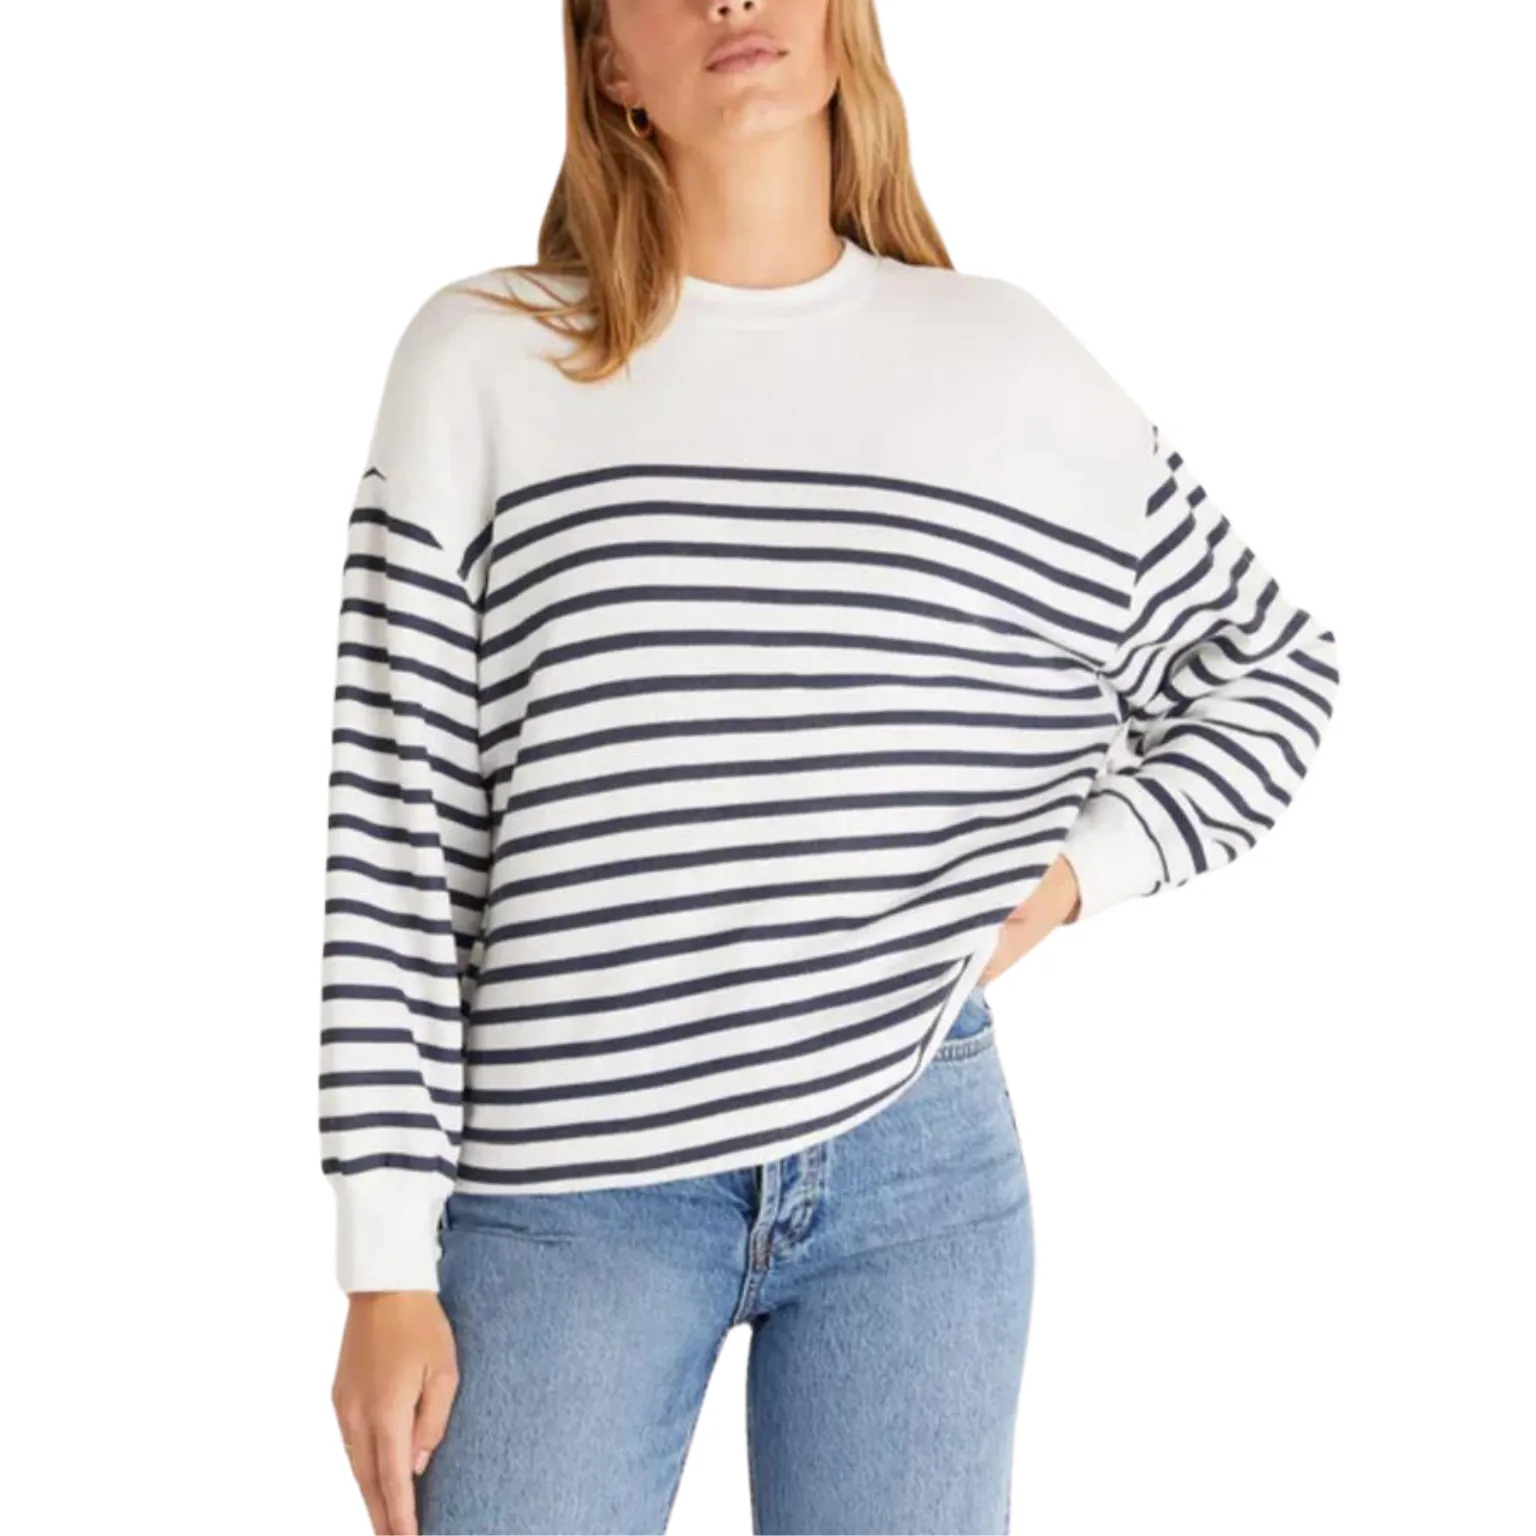 Striped Sweatshirts manufacturing with trendy design